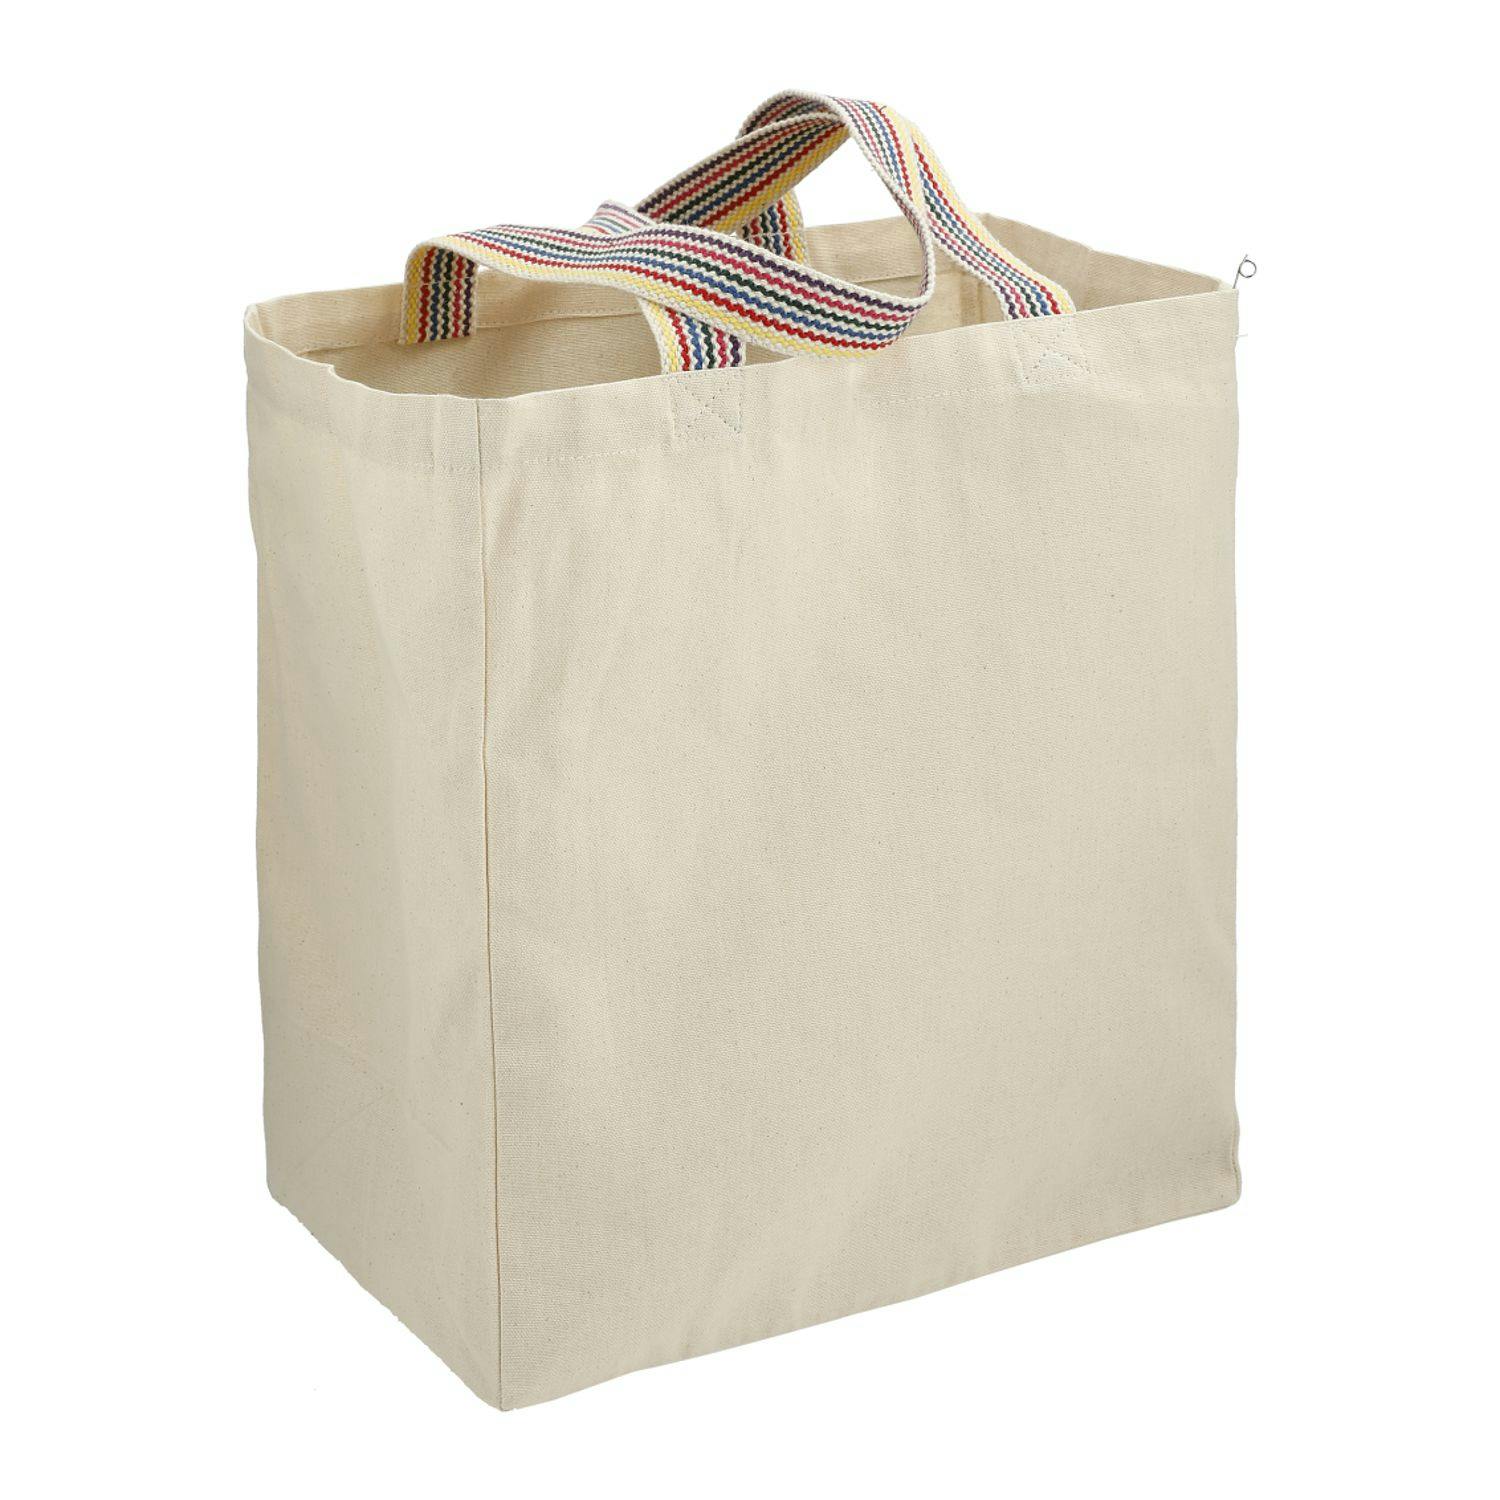 Rainbow Recycled 8oz Cotton Grocery Tote - additional Image 1